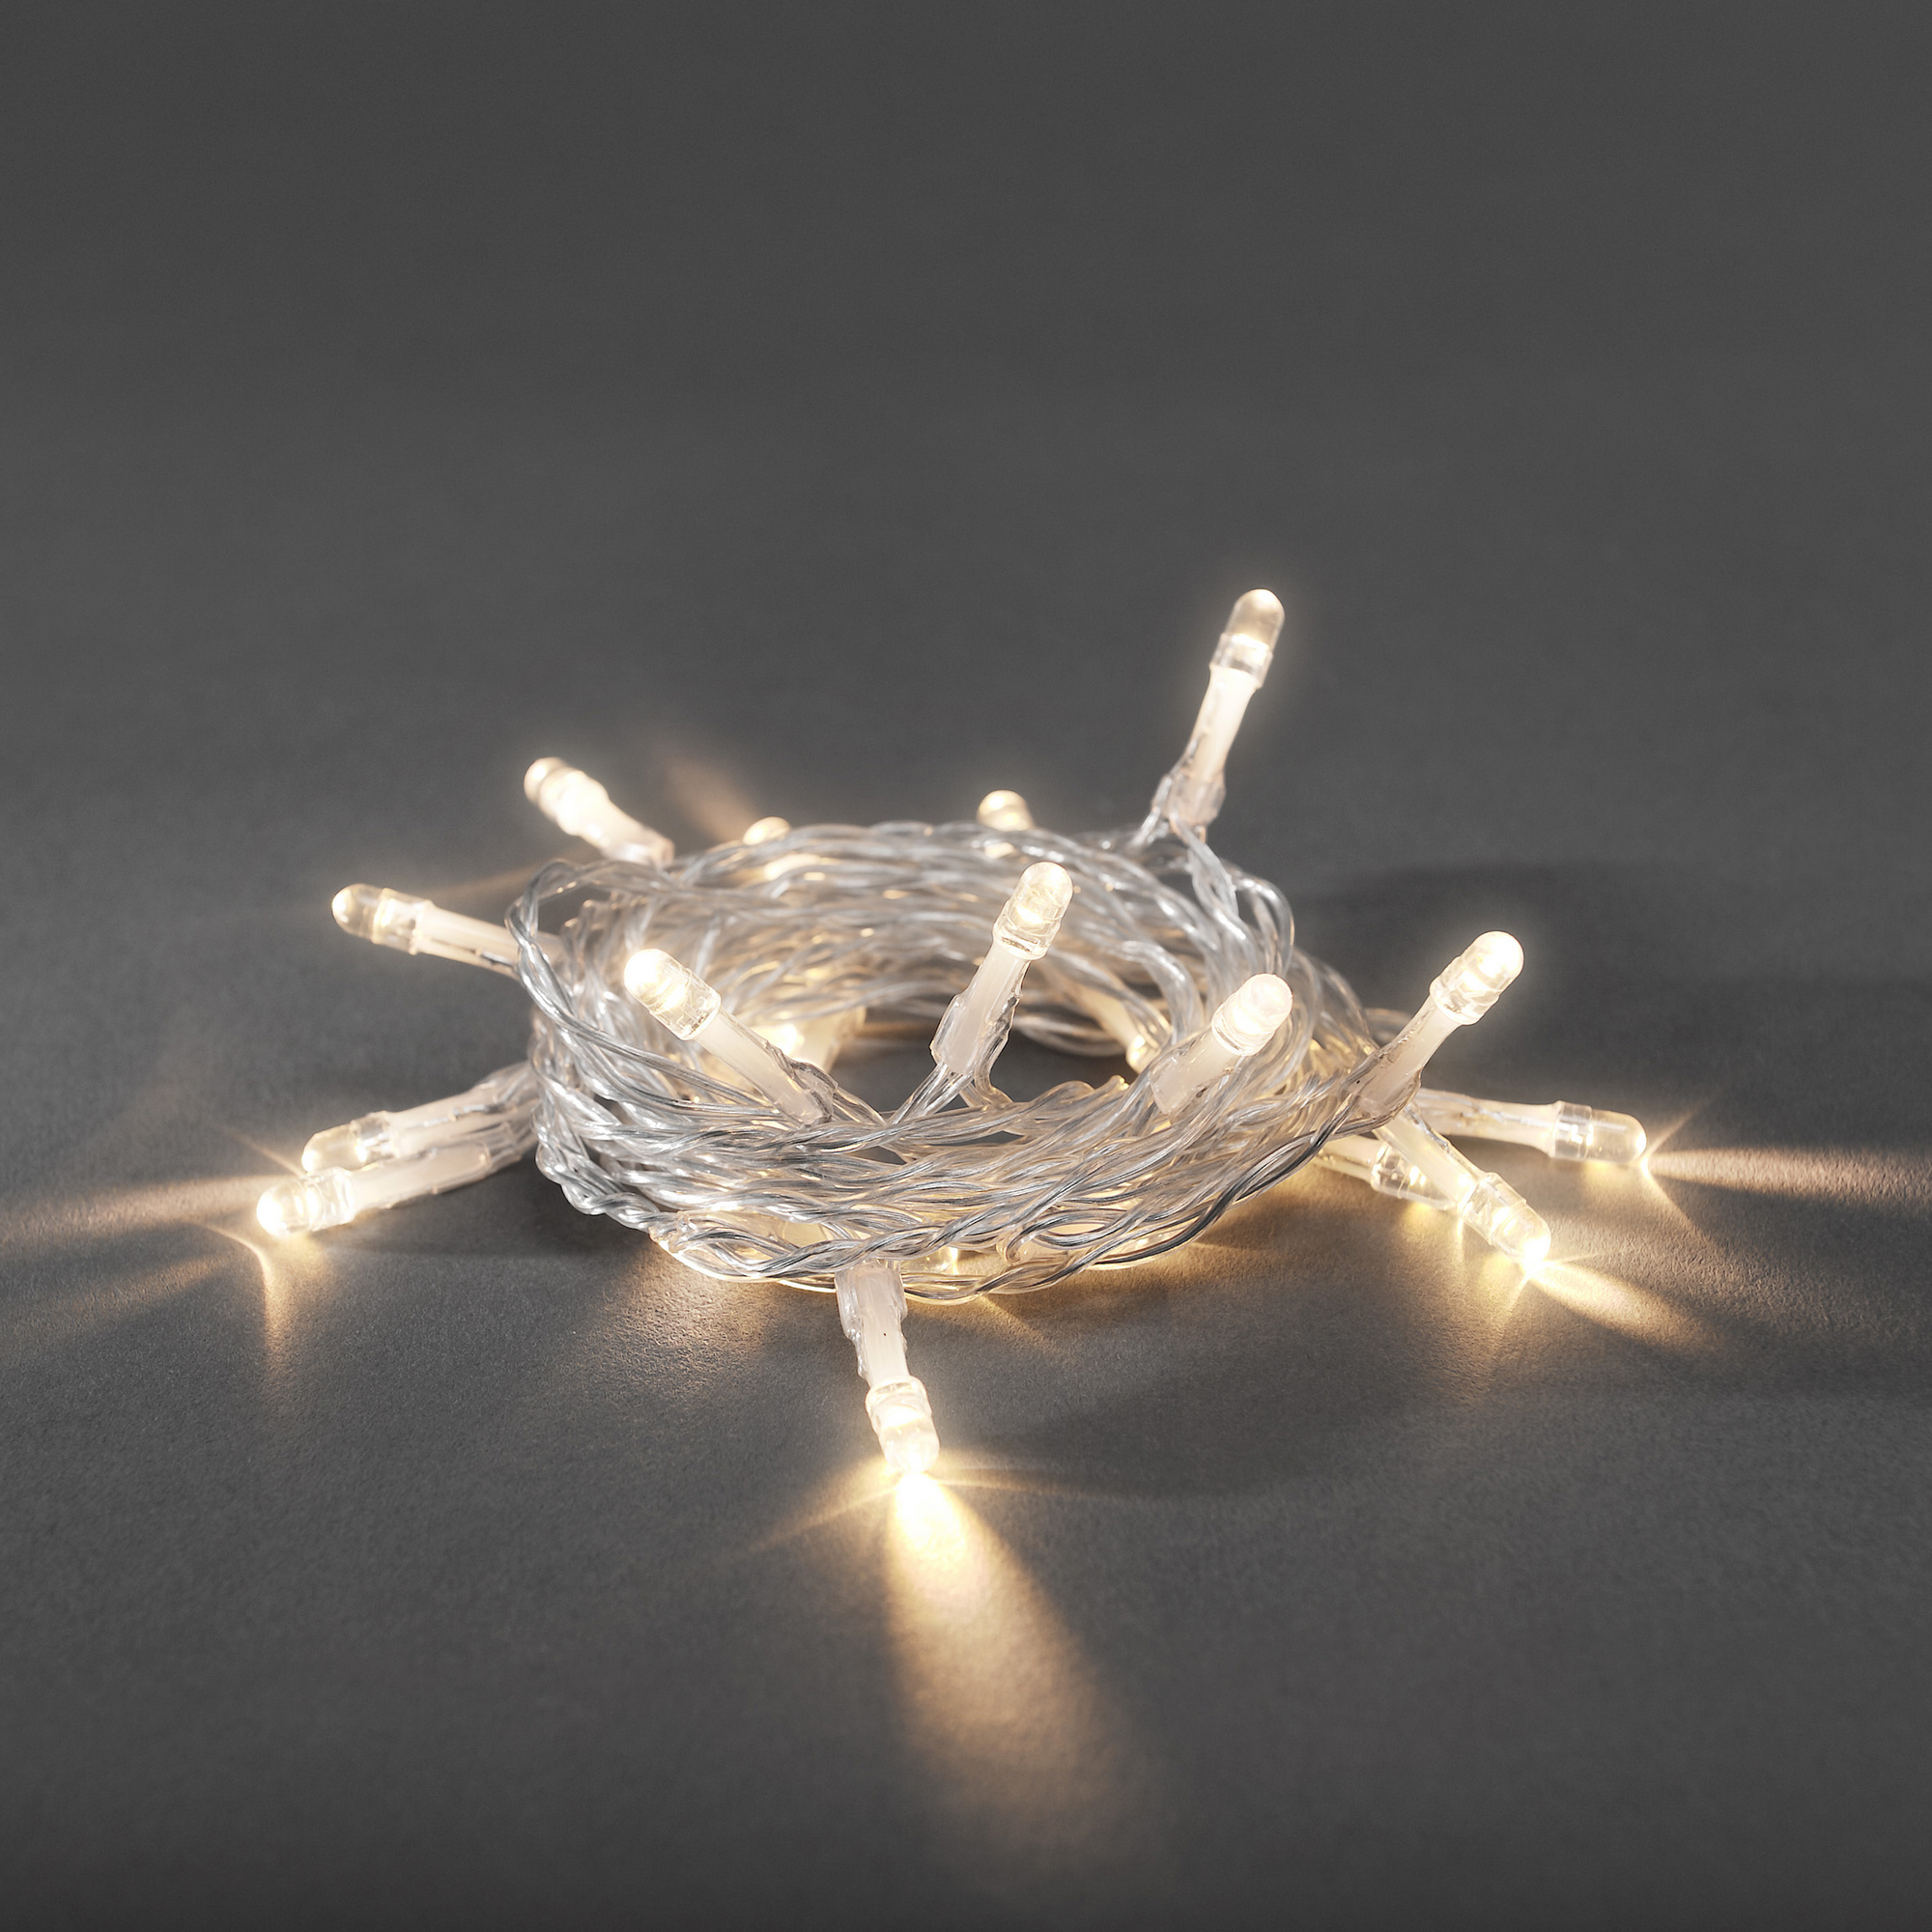 Weihnachtsbeleuchtung LED-Lichterkette weiß 10 LEDs 185 m + product picture